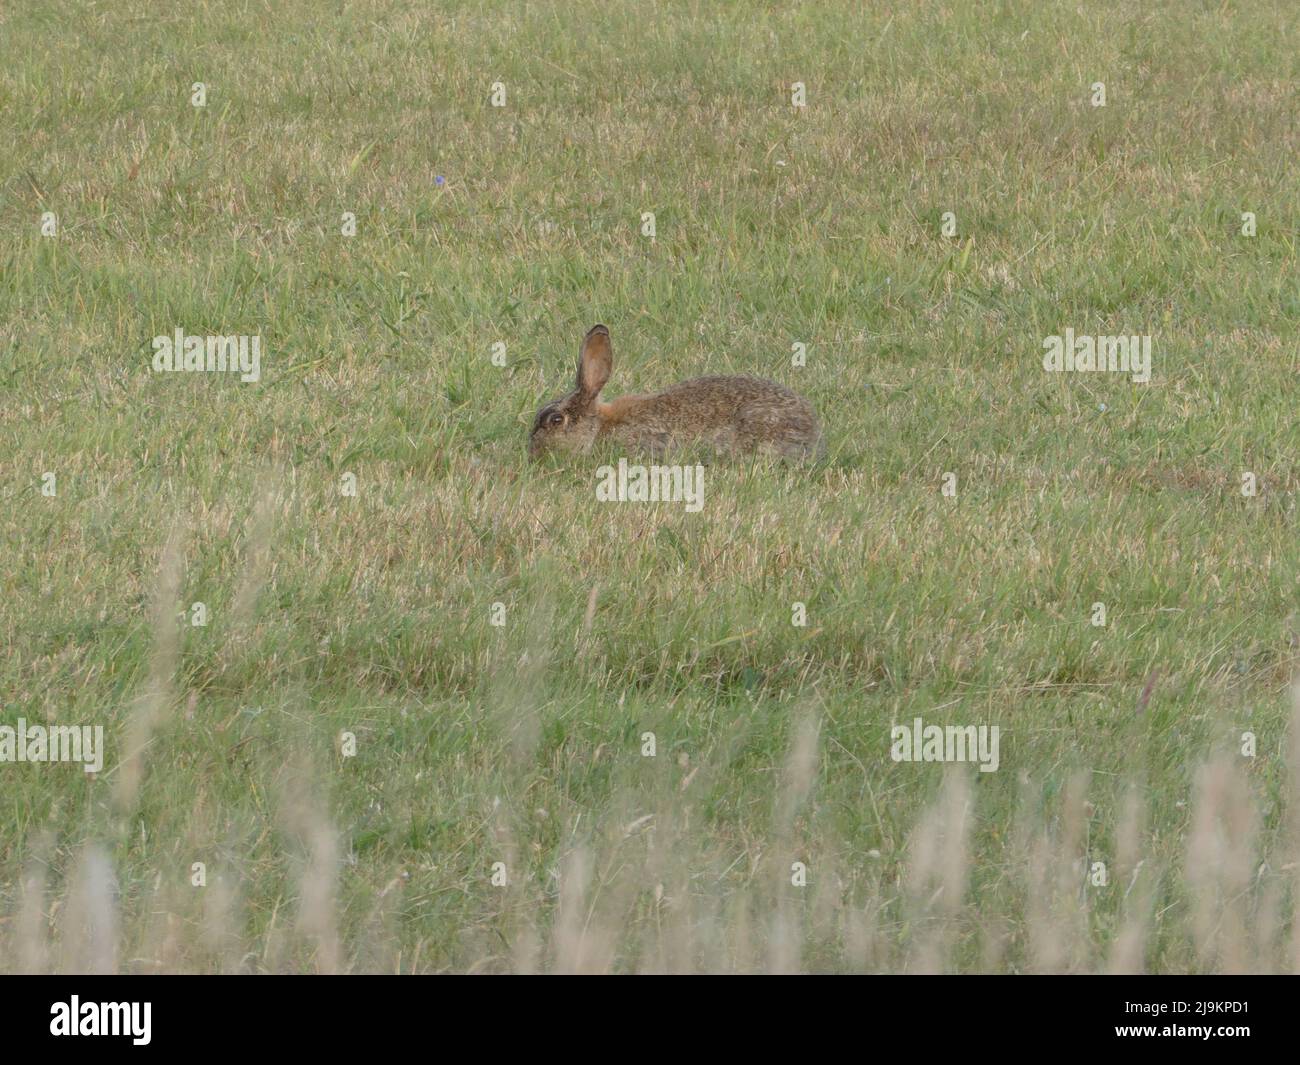 Funny bunny in the gras Stock Photo